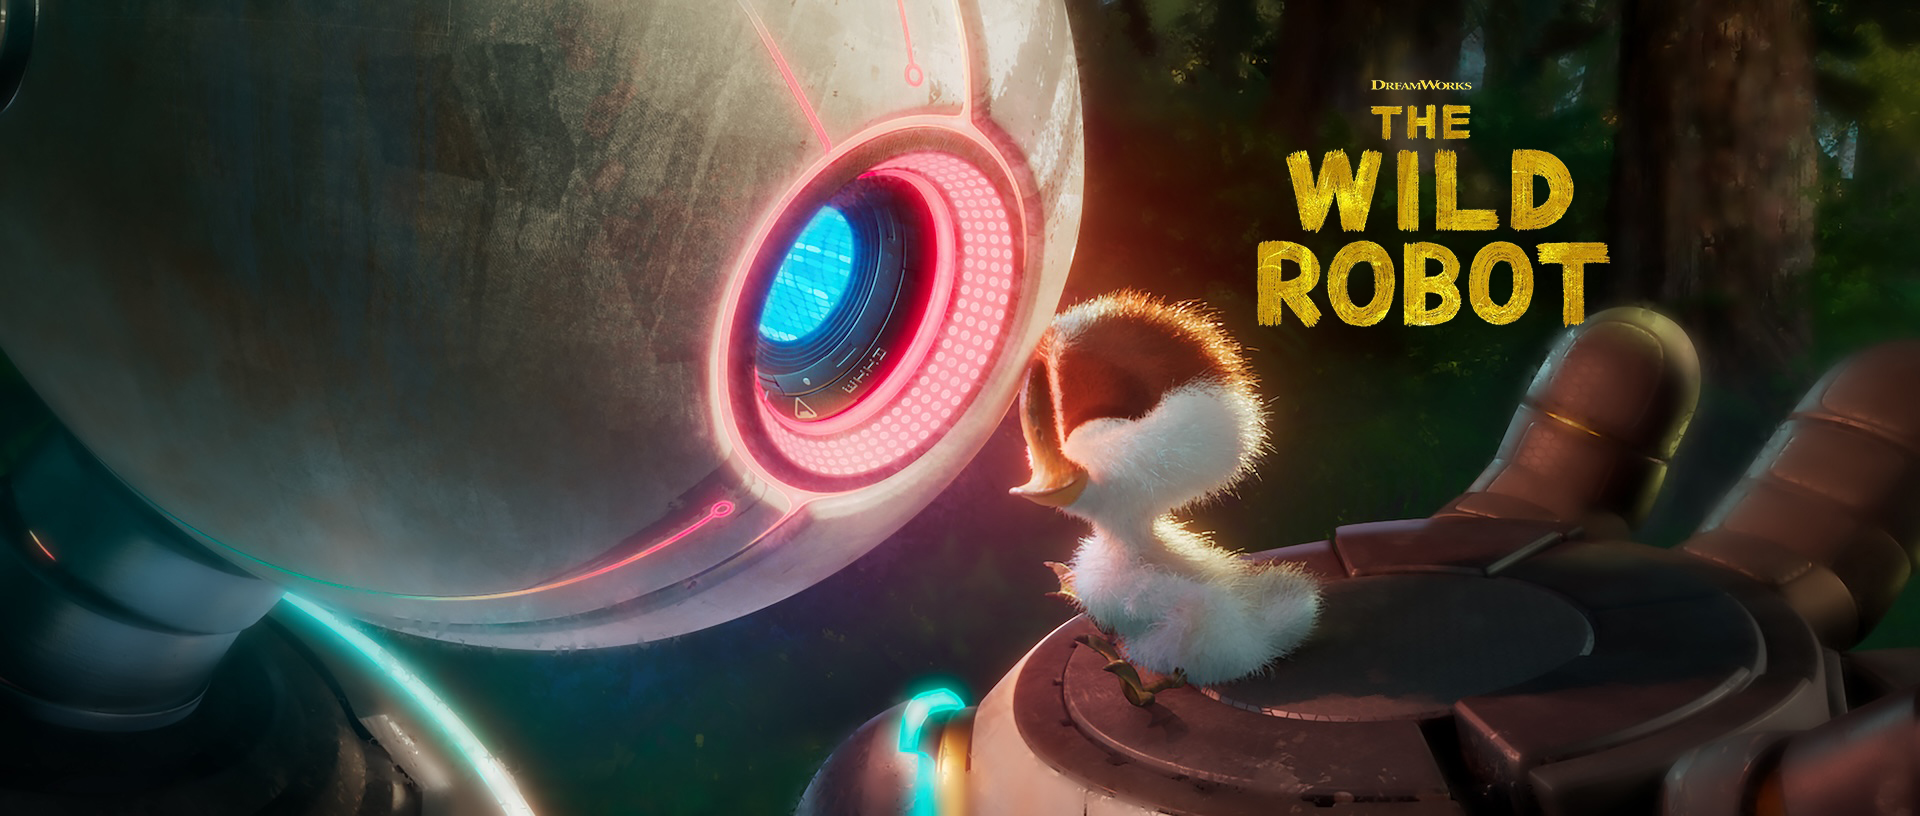 THE WILD ROBOT – Dreamworks Animation’s New Film Highlights Life Beyond Circuits